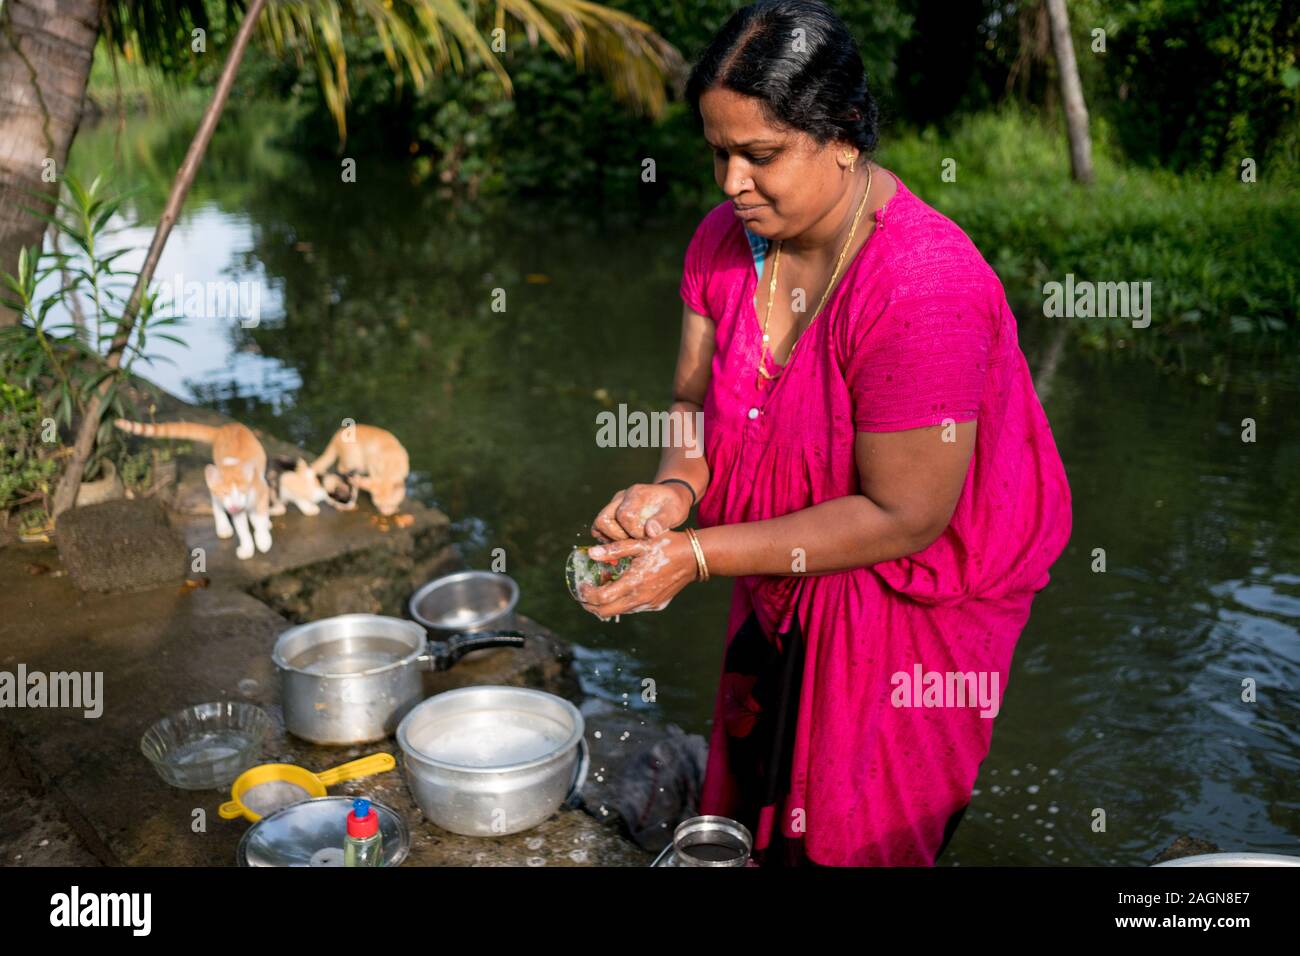 Alleppey, India - 22 september 2019: adult indian woman doing daily chores in rural india washing dishes by the river with traditional colorful sari a Stock Photo